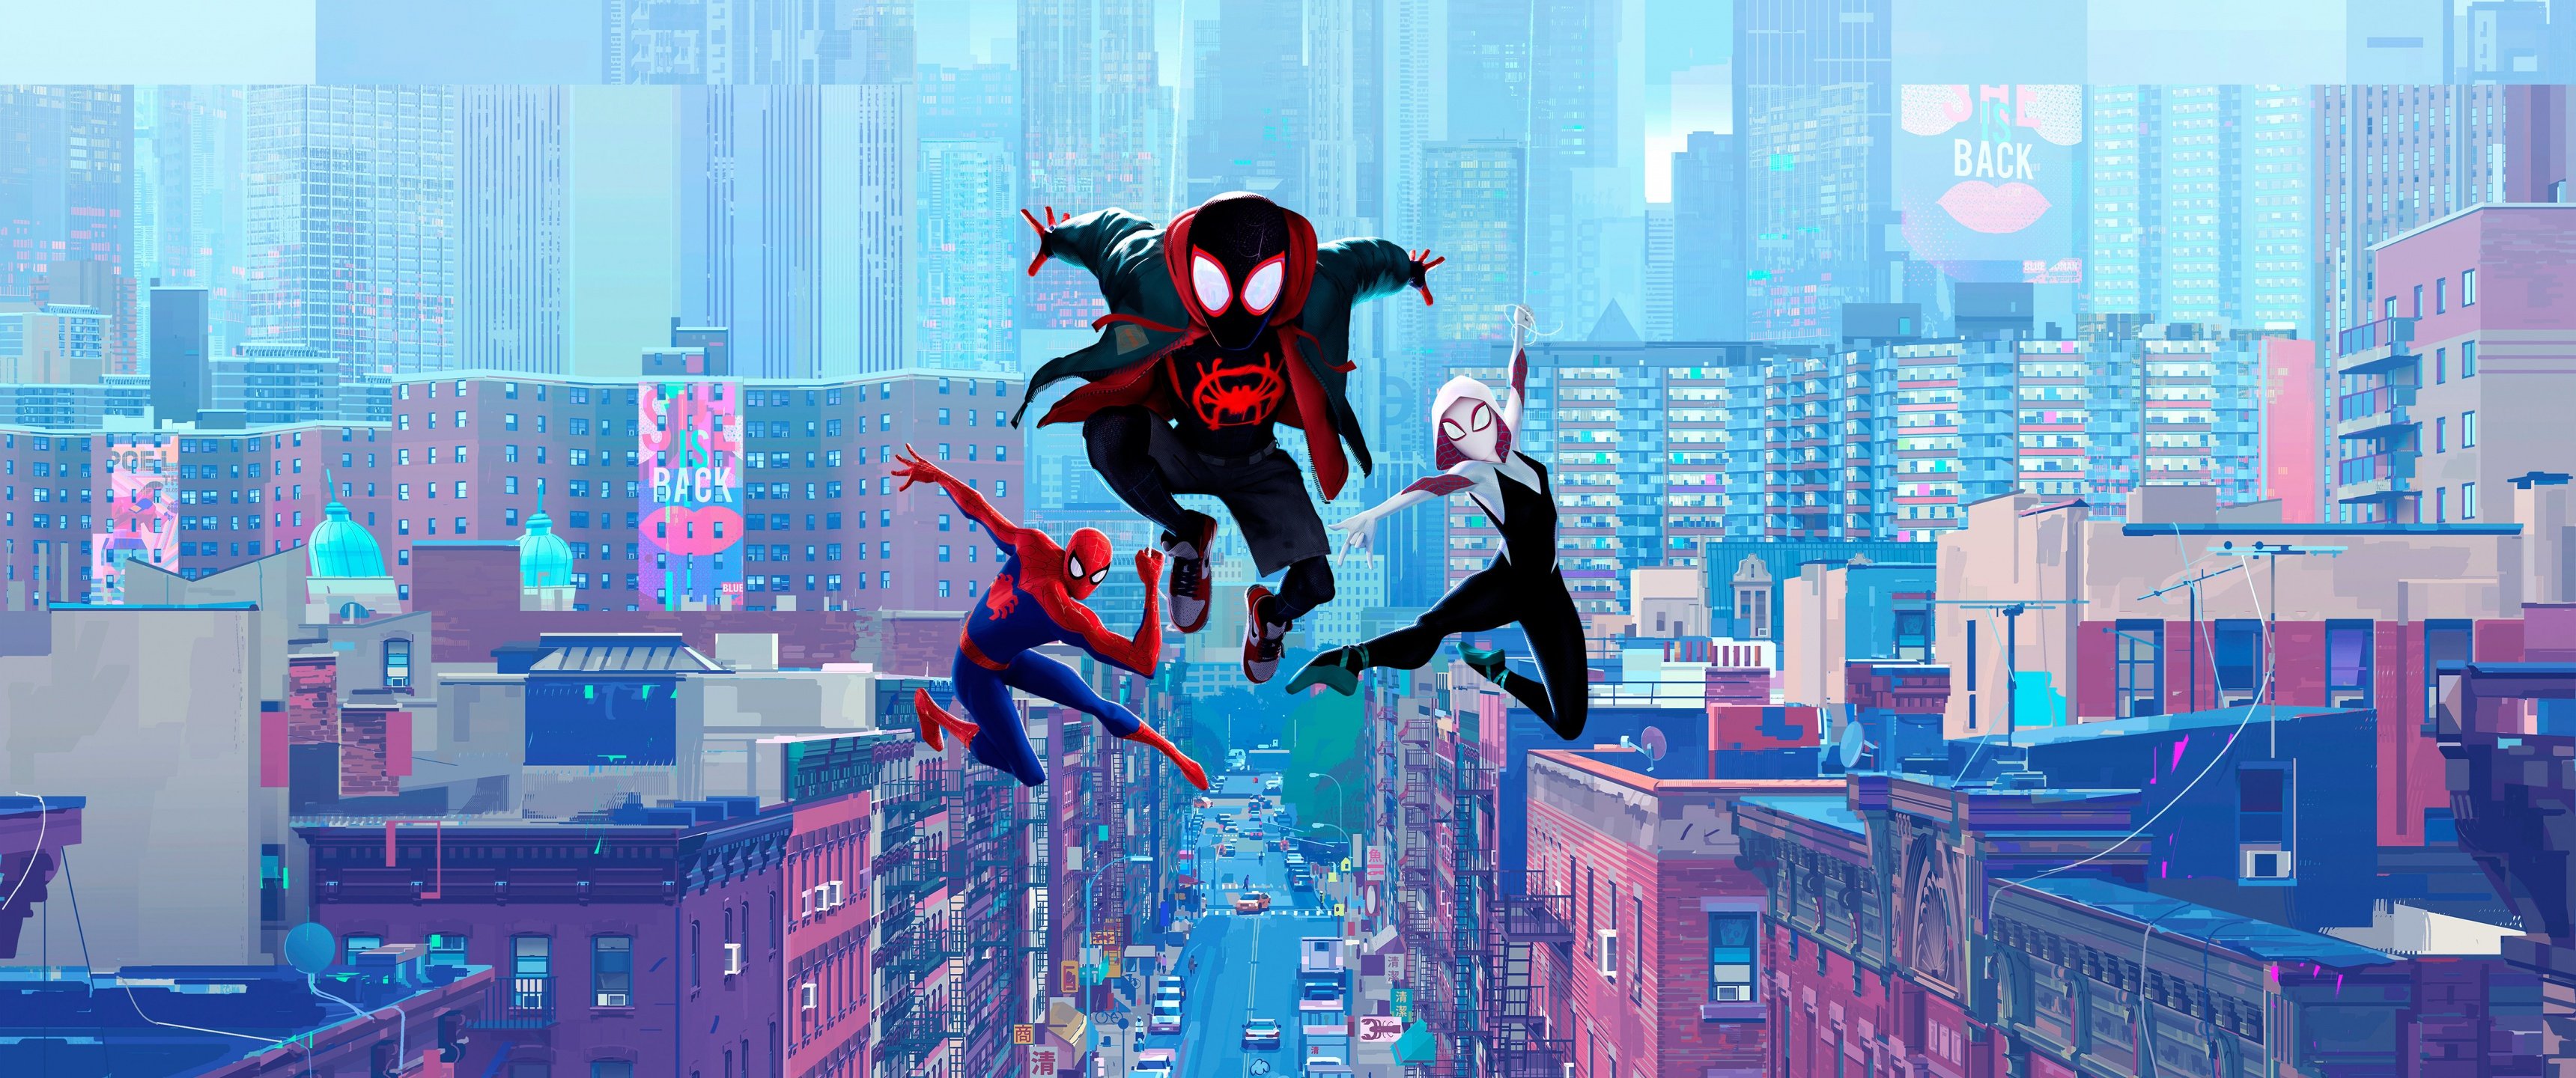 Spider Man: Into The Spider Verse Wallpaper 4K, Miles Morales, Movies